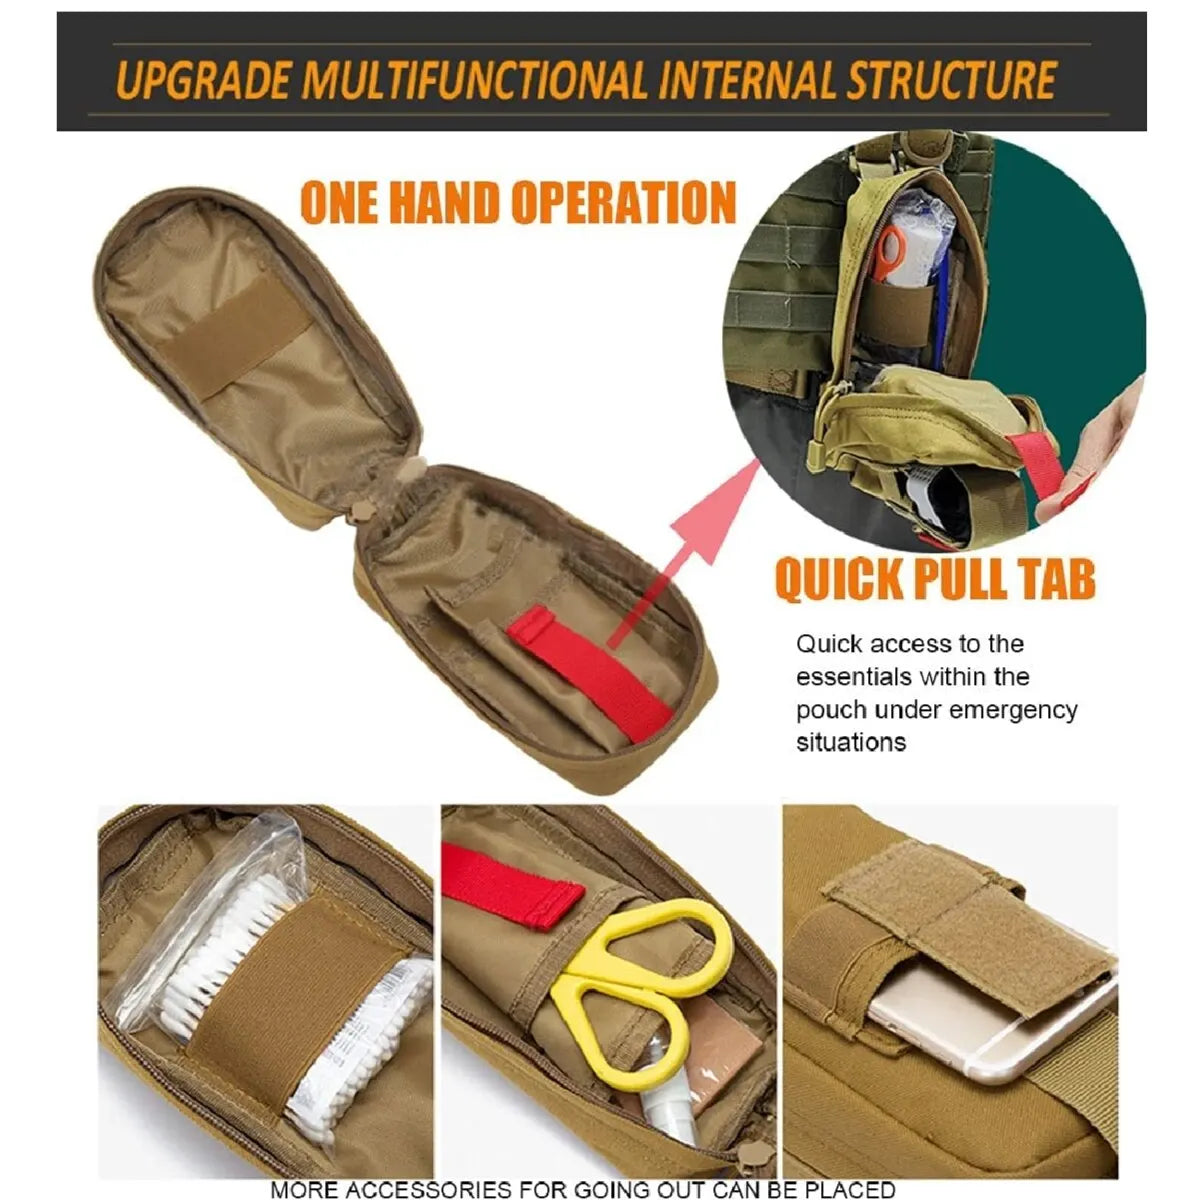 Tactical EMT First Aid Kit Pouch Bag With Tourniquet Scissors Bandage for Emergency IFAK Trauma Military Combat